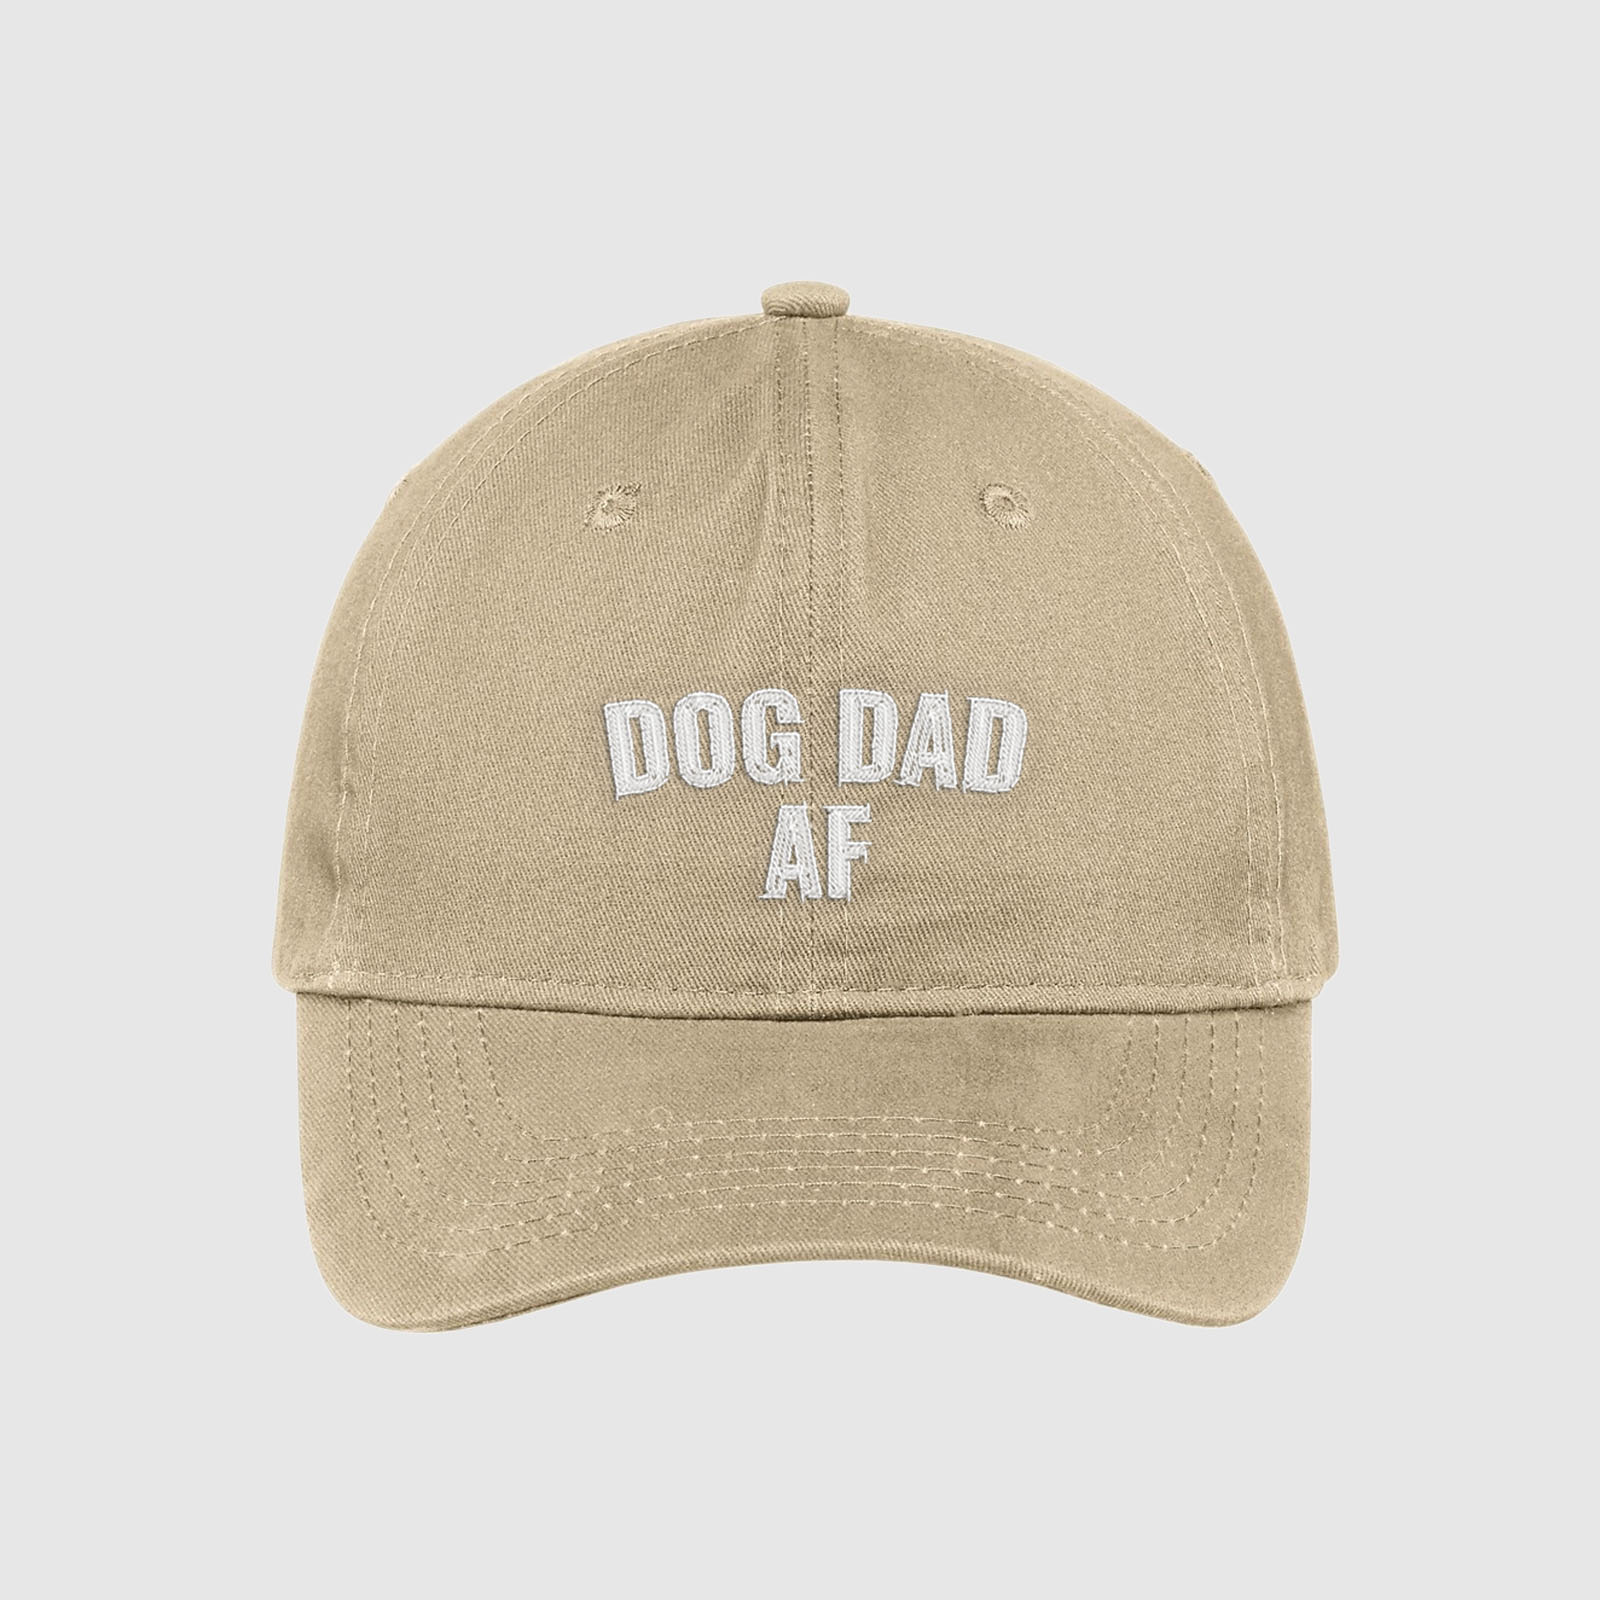 Tan Dog Dad AF Hat embroidered with white text